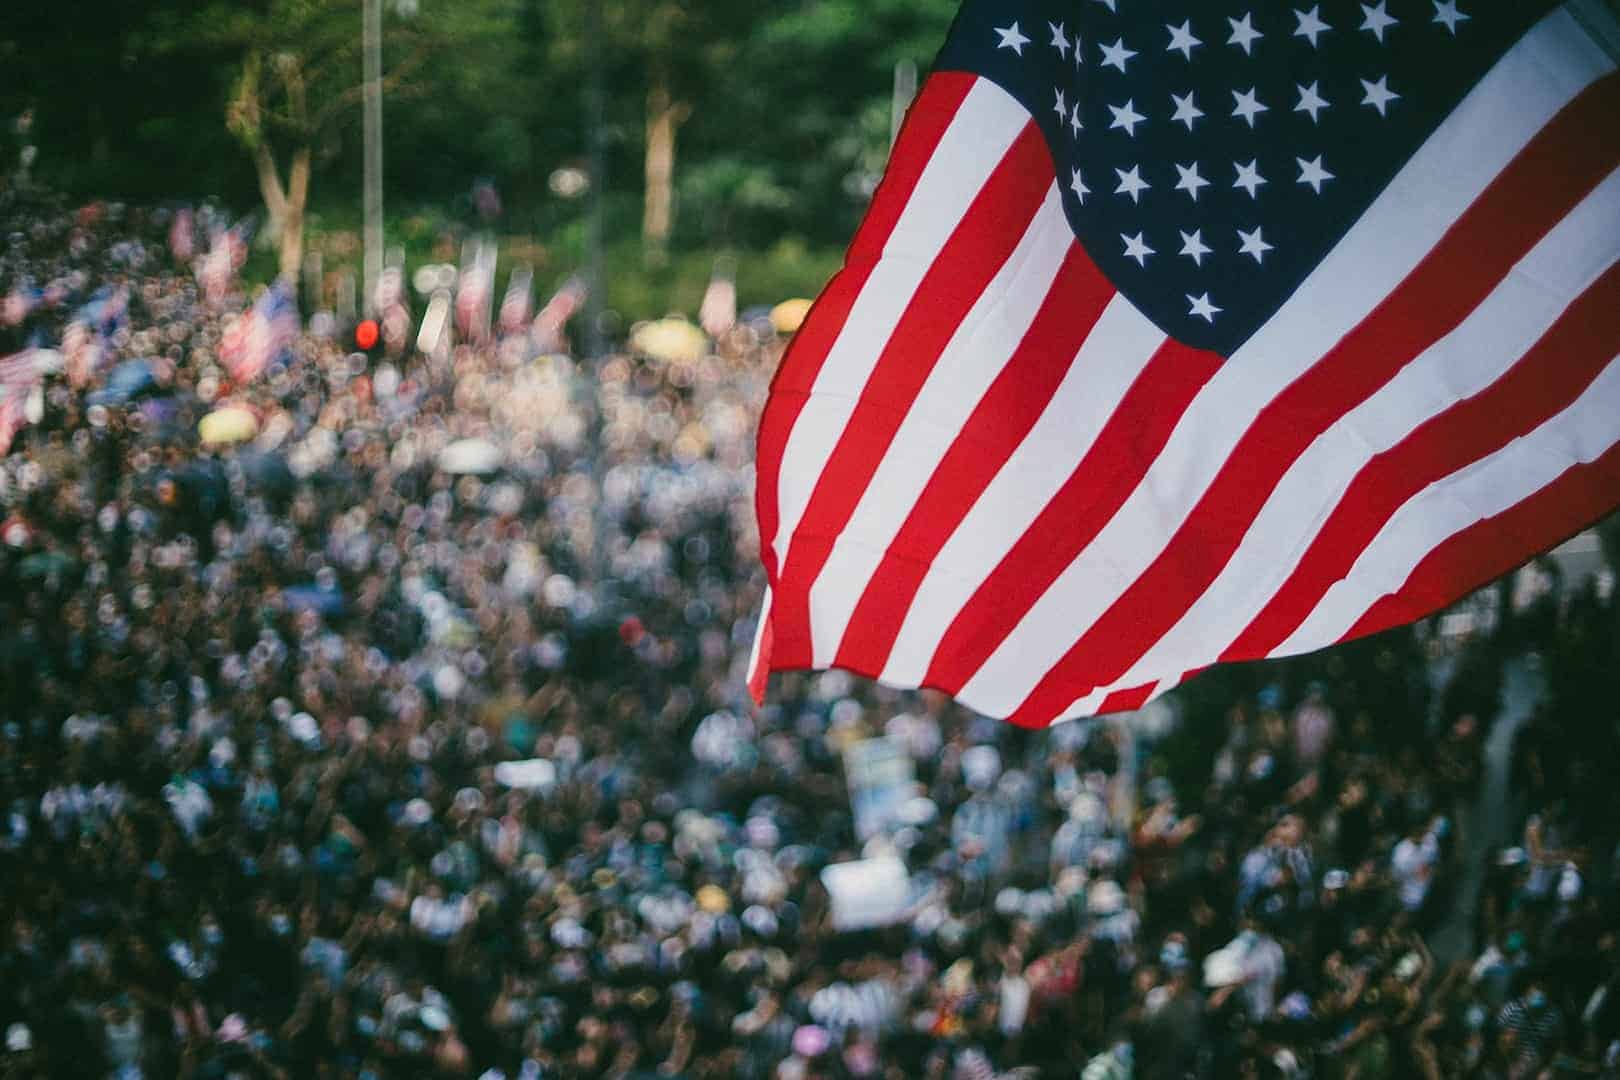 Image of the USA flag in-front of a dense crowd signifying community